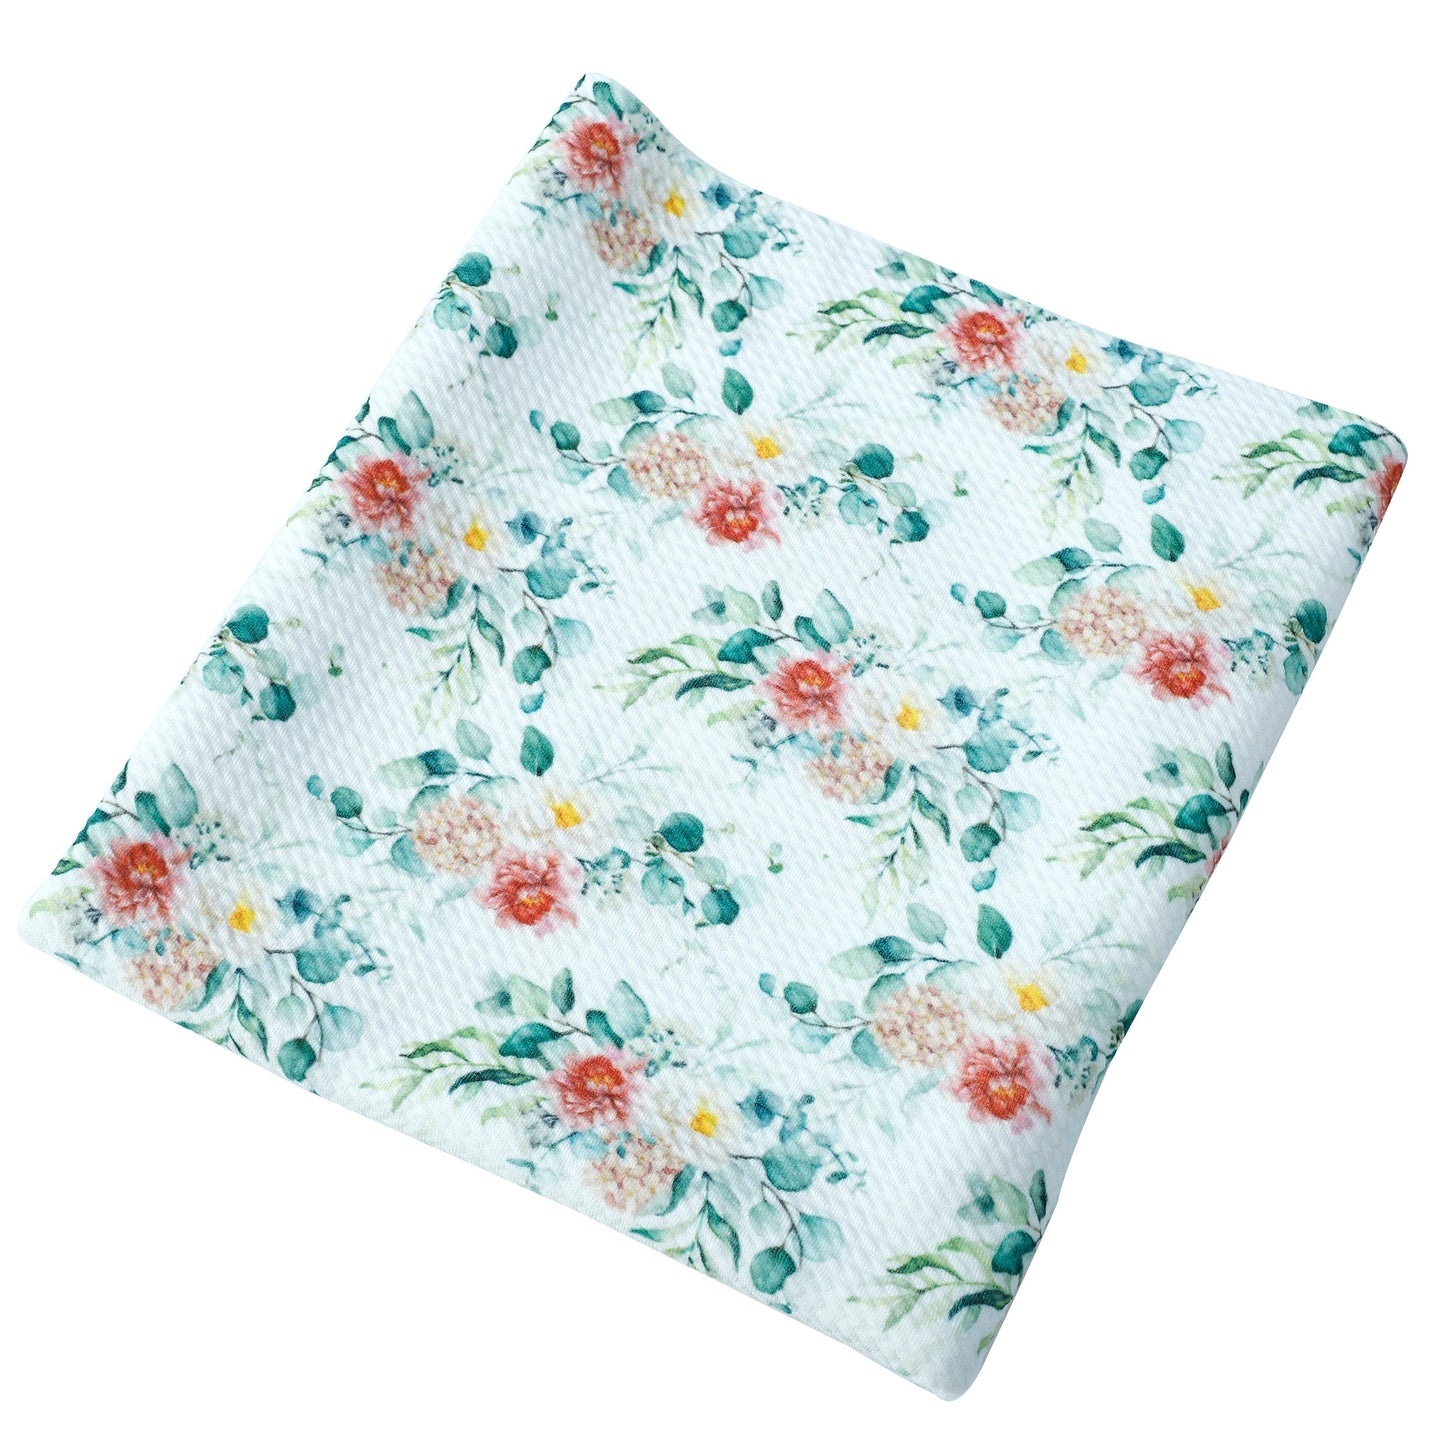 Floral Bullet Fabric F6